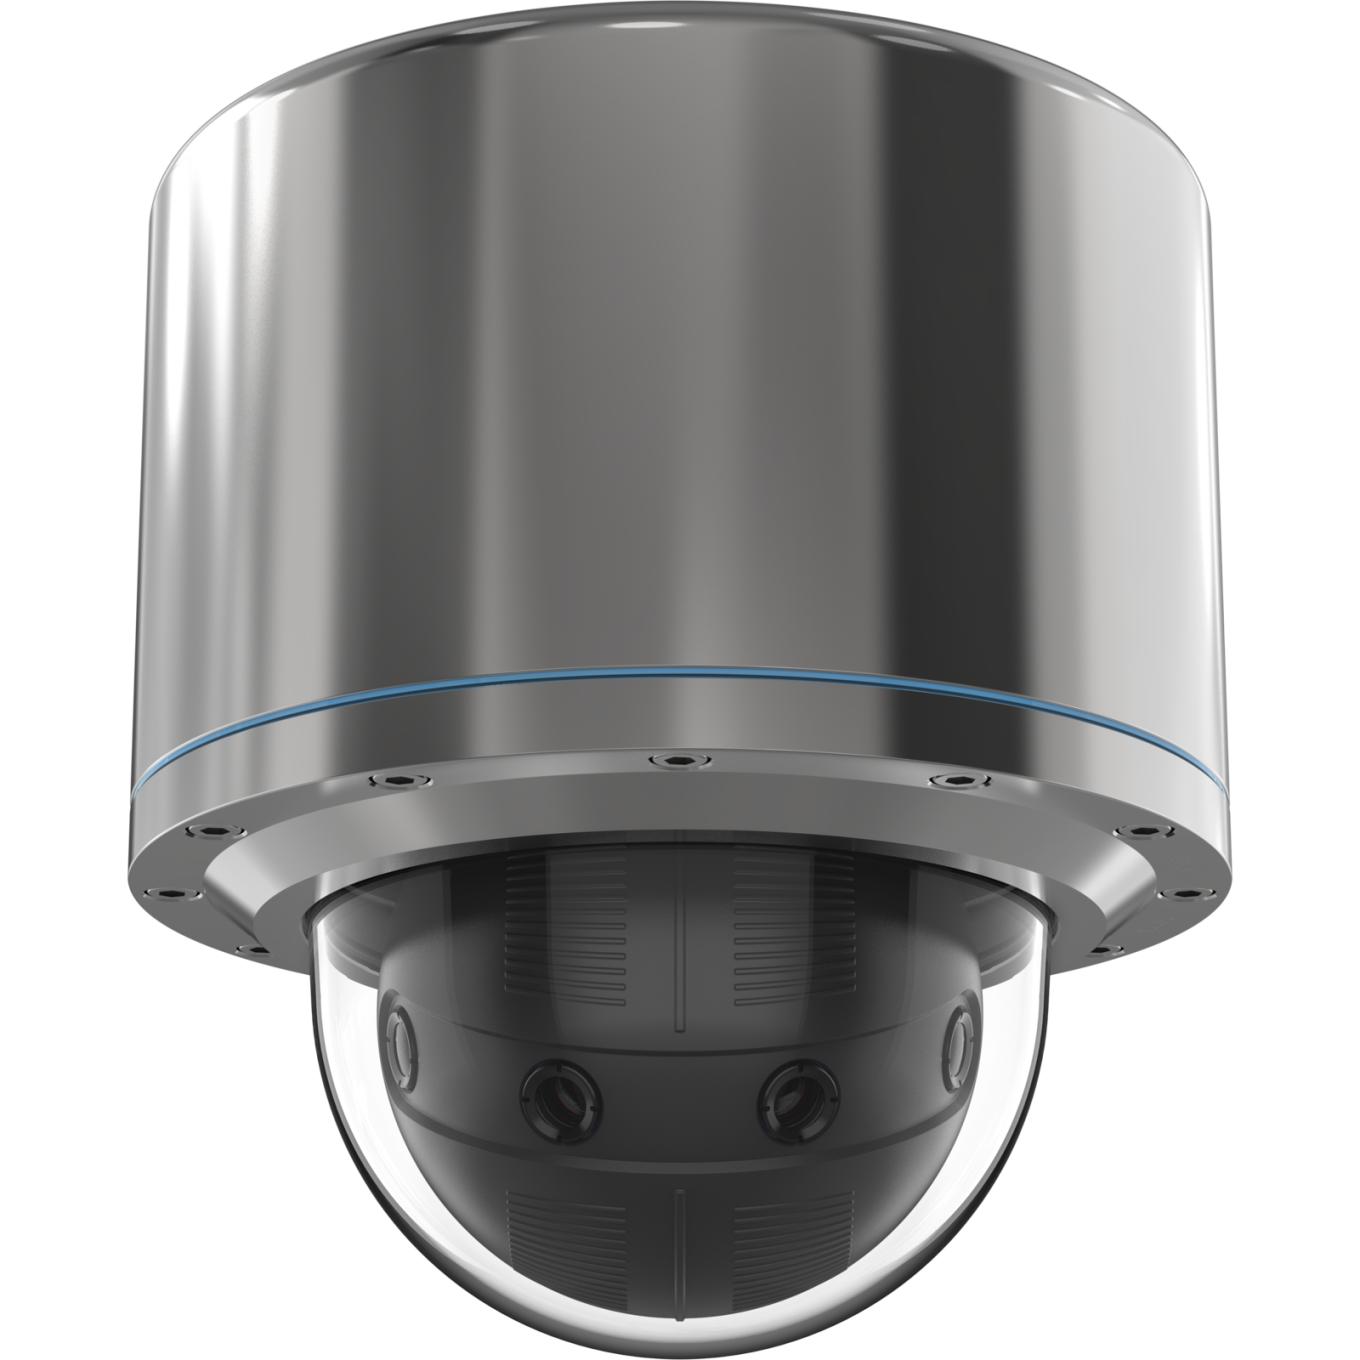 ExCam XF P3807 Explosion-Protected Panoramic Camera, viewed from its front